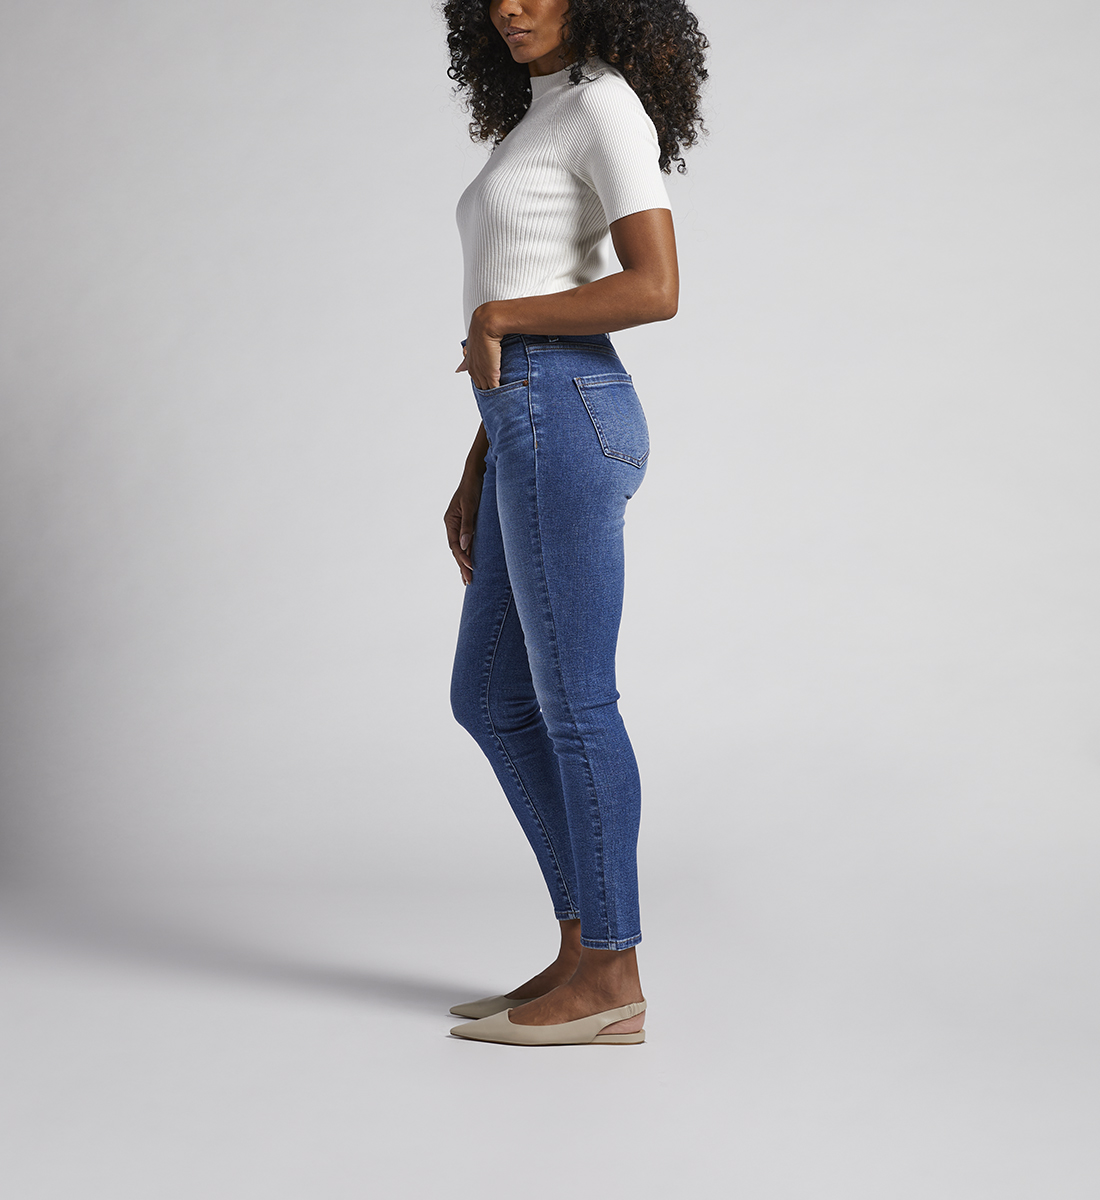 Valentina High Rise Skinny Pull-On Jeans - Jag Jeans US